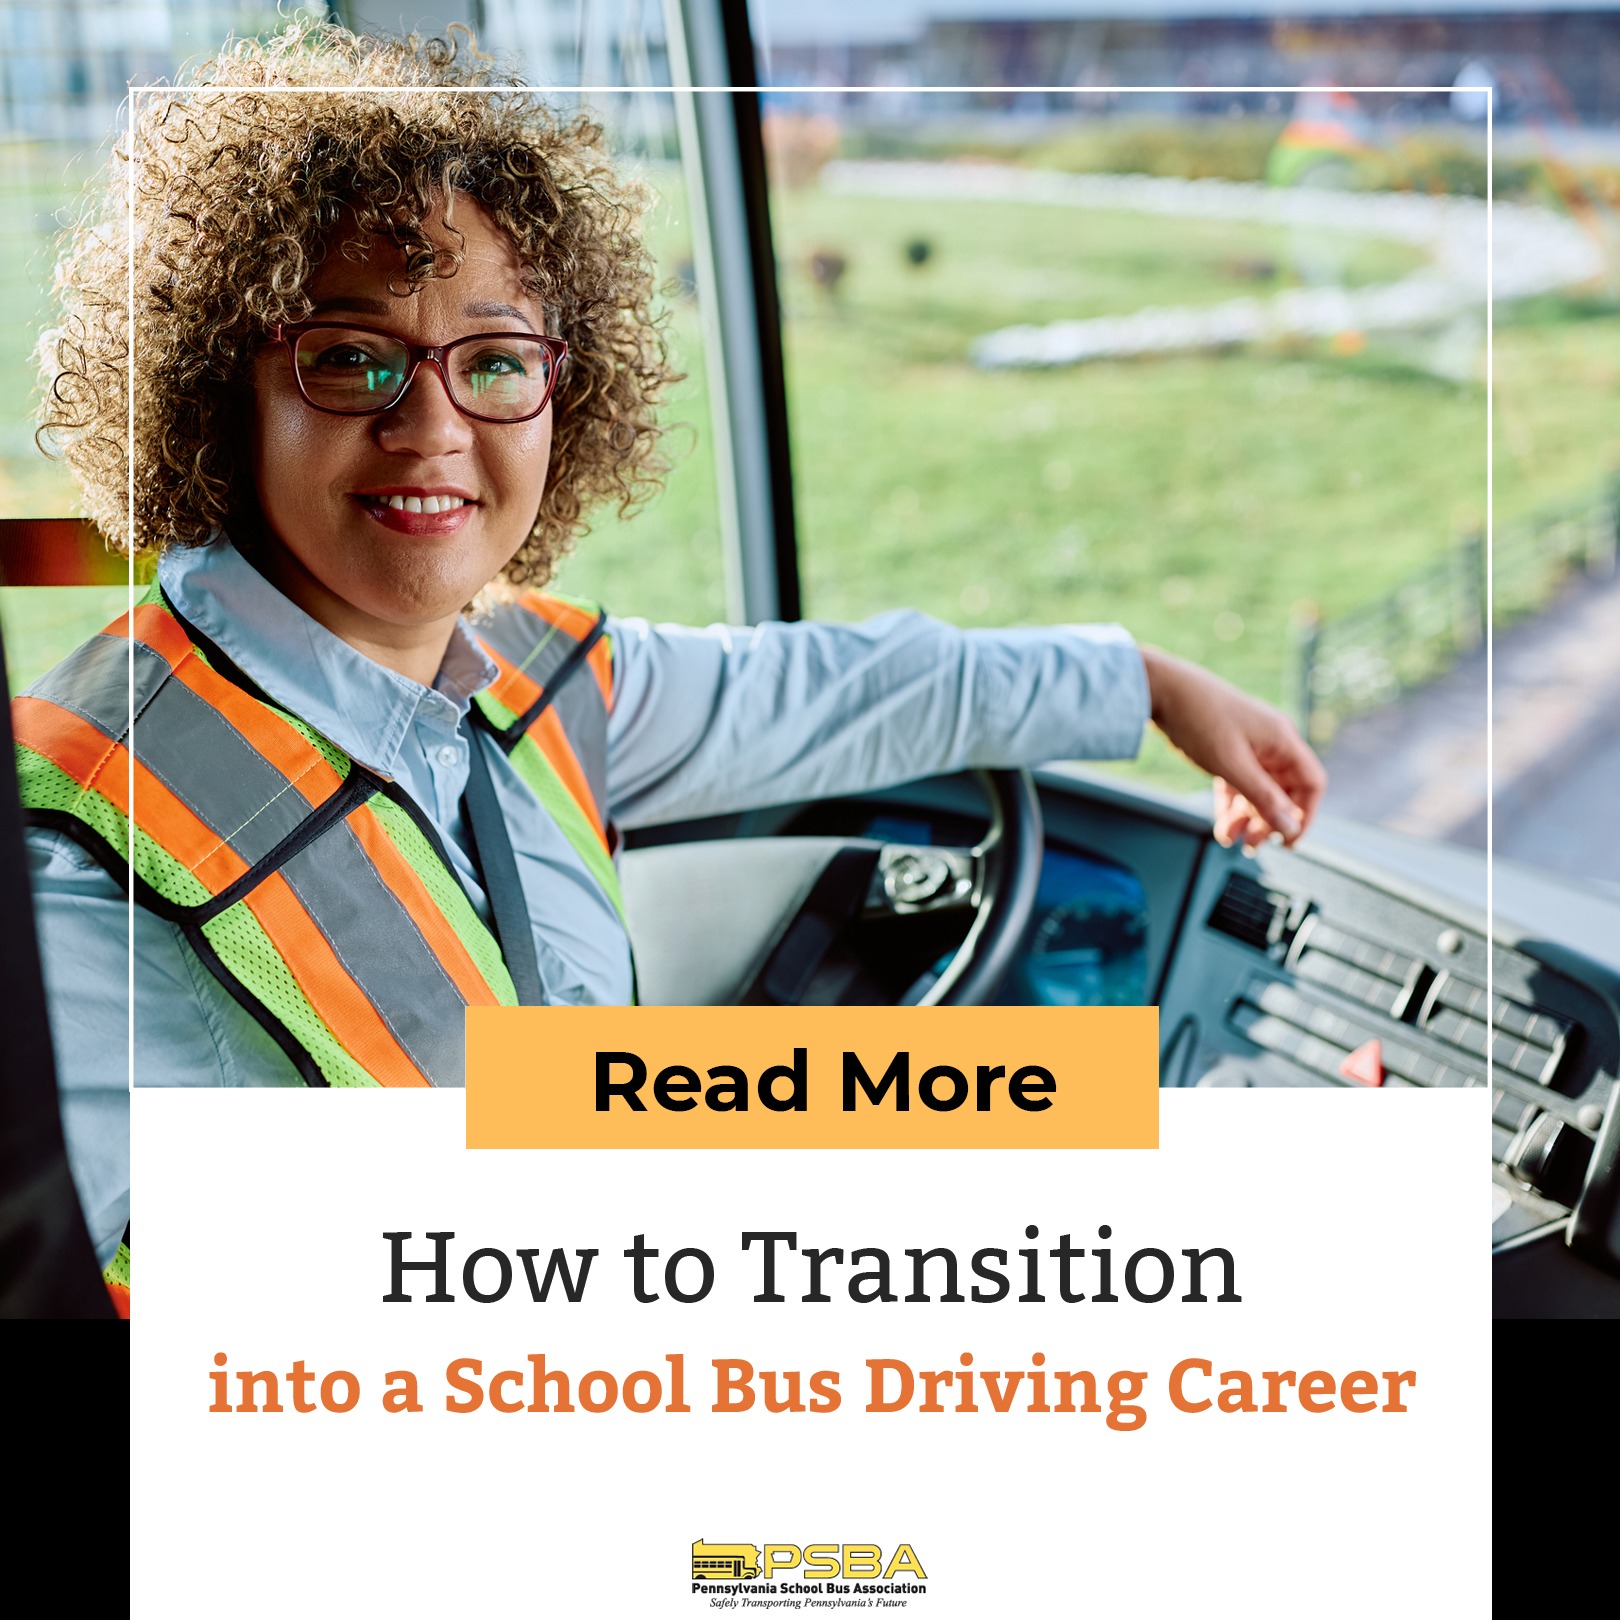 How to Transition into a School Bus Driving Career